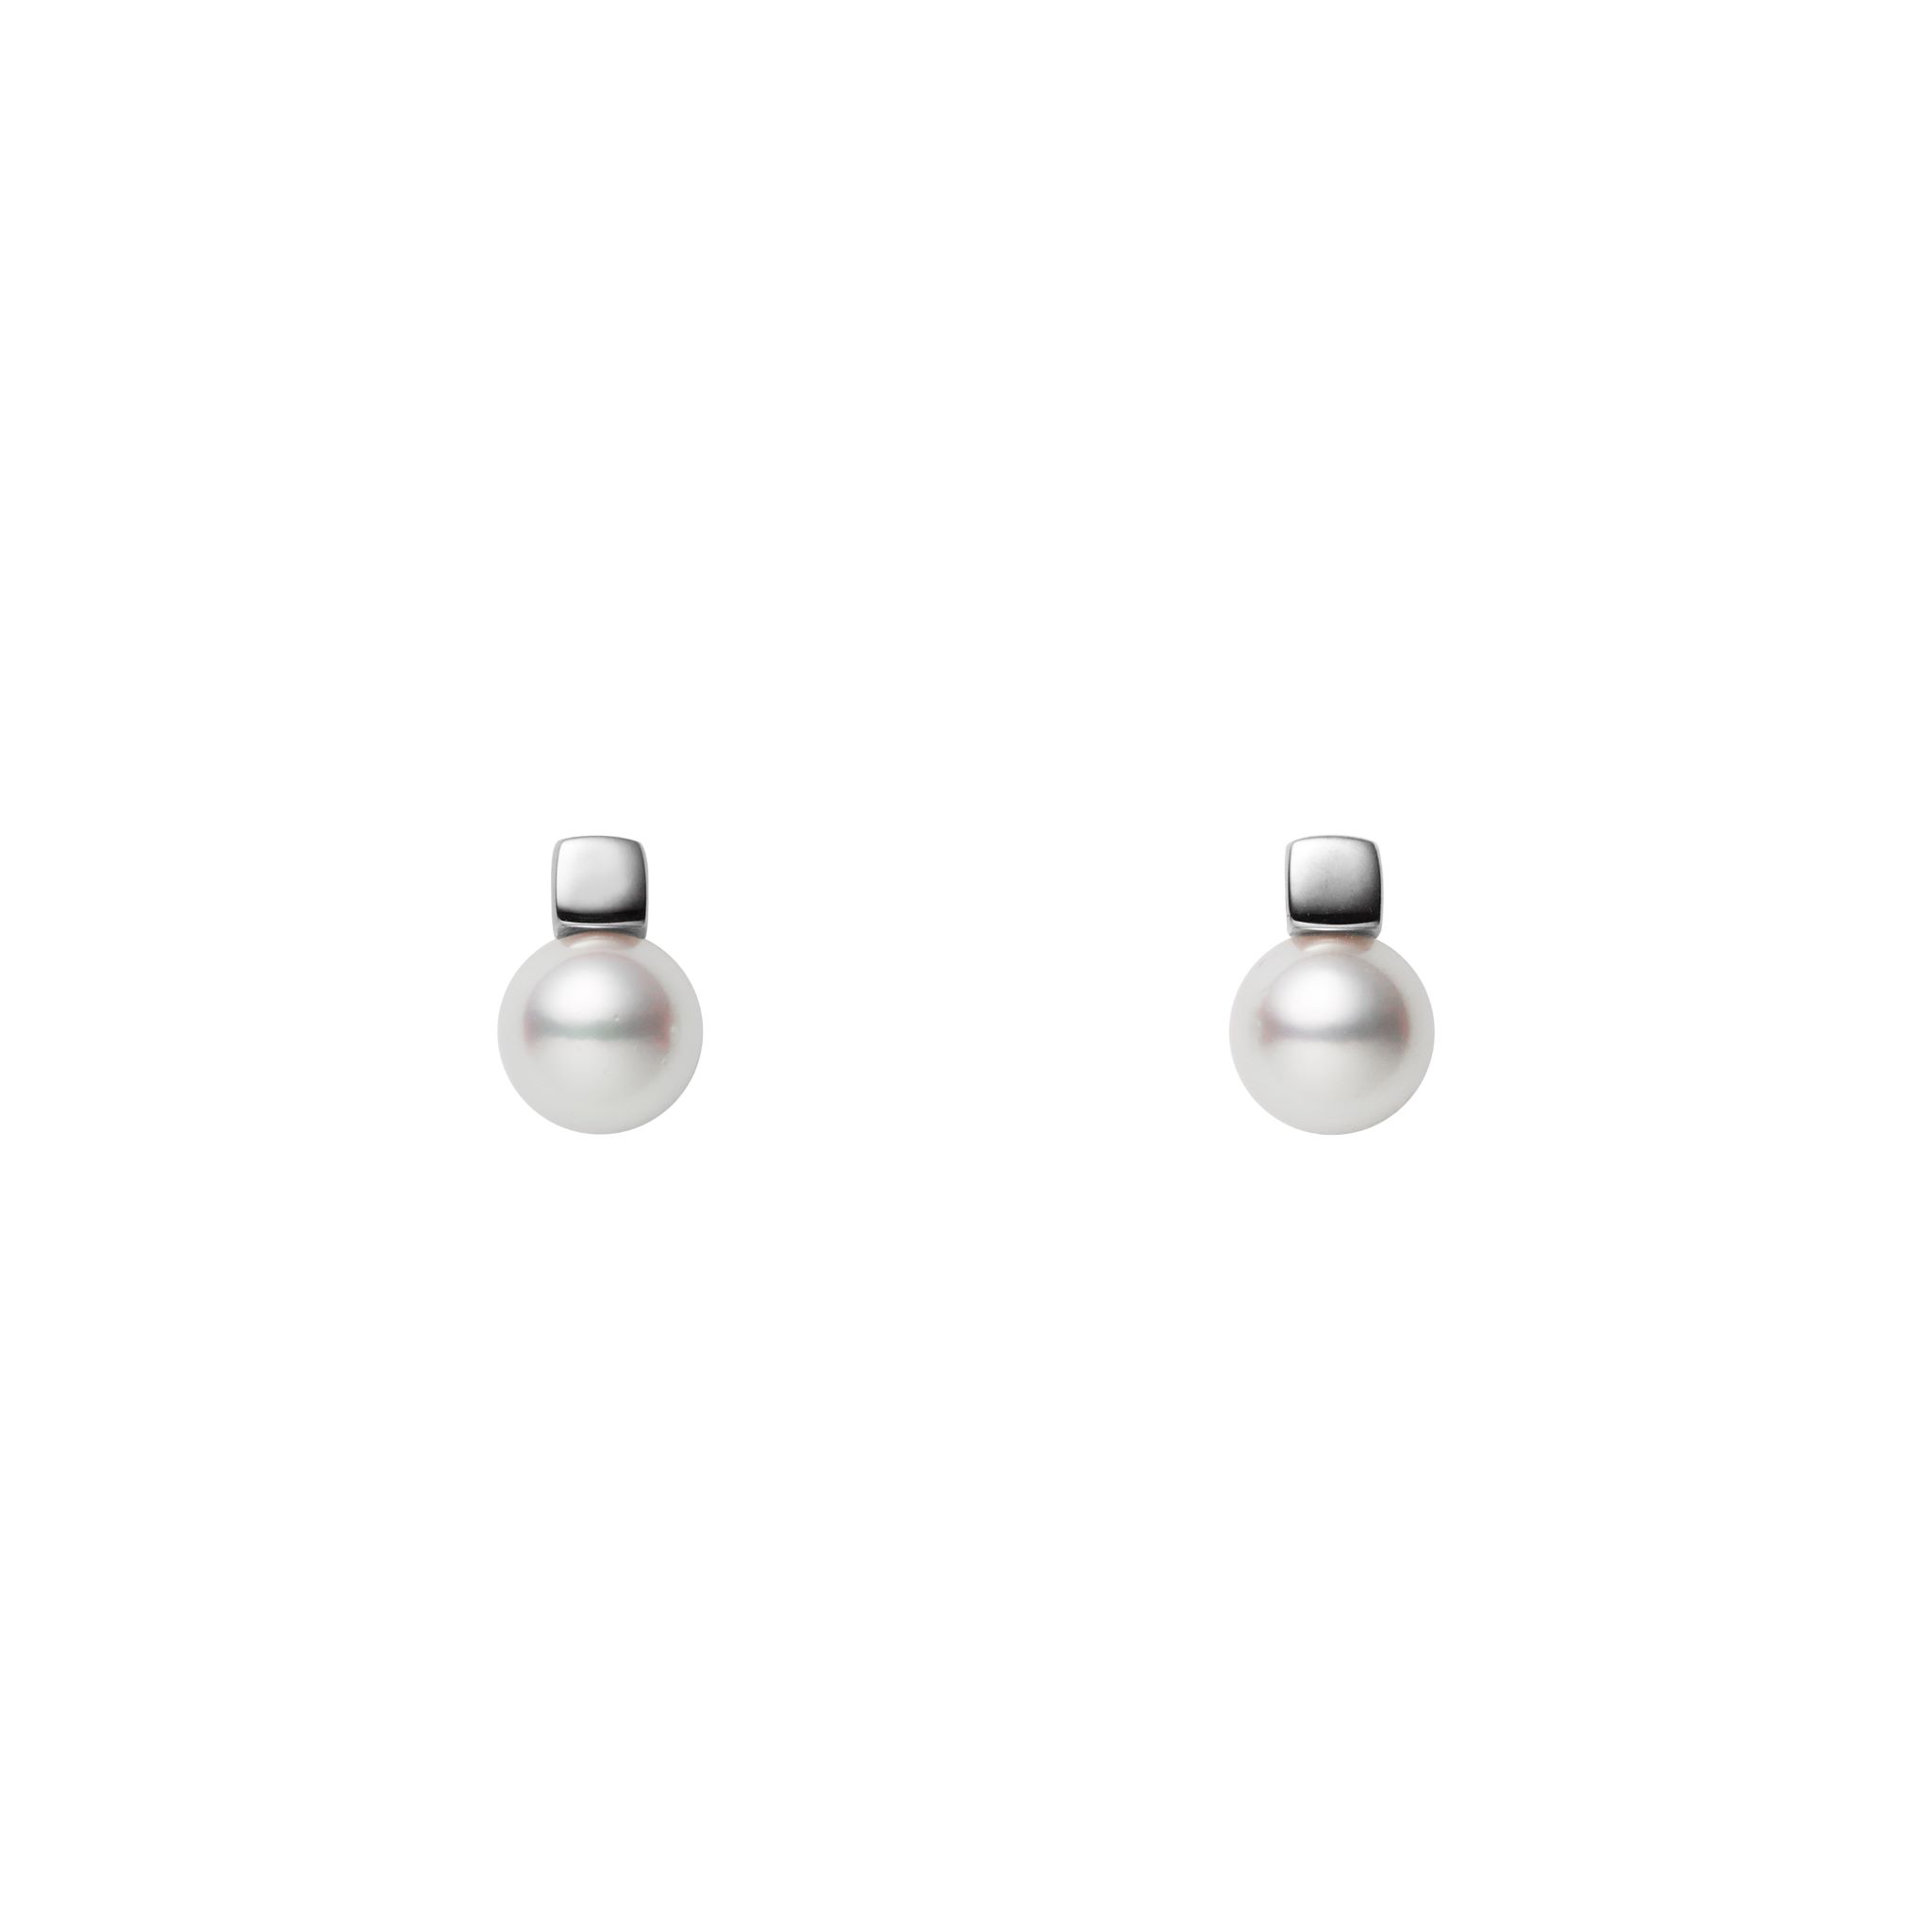 This pair of pearl drop earrings by Mikimoto is crafted from 18k white gold and features 7mm Akoya pearls.